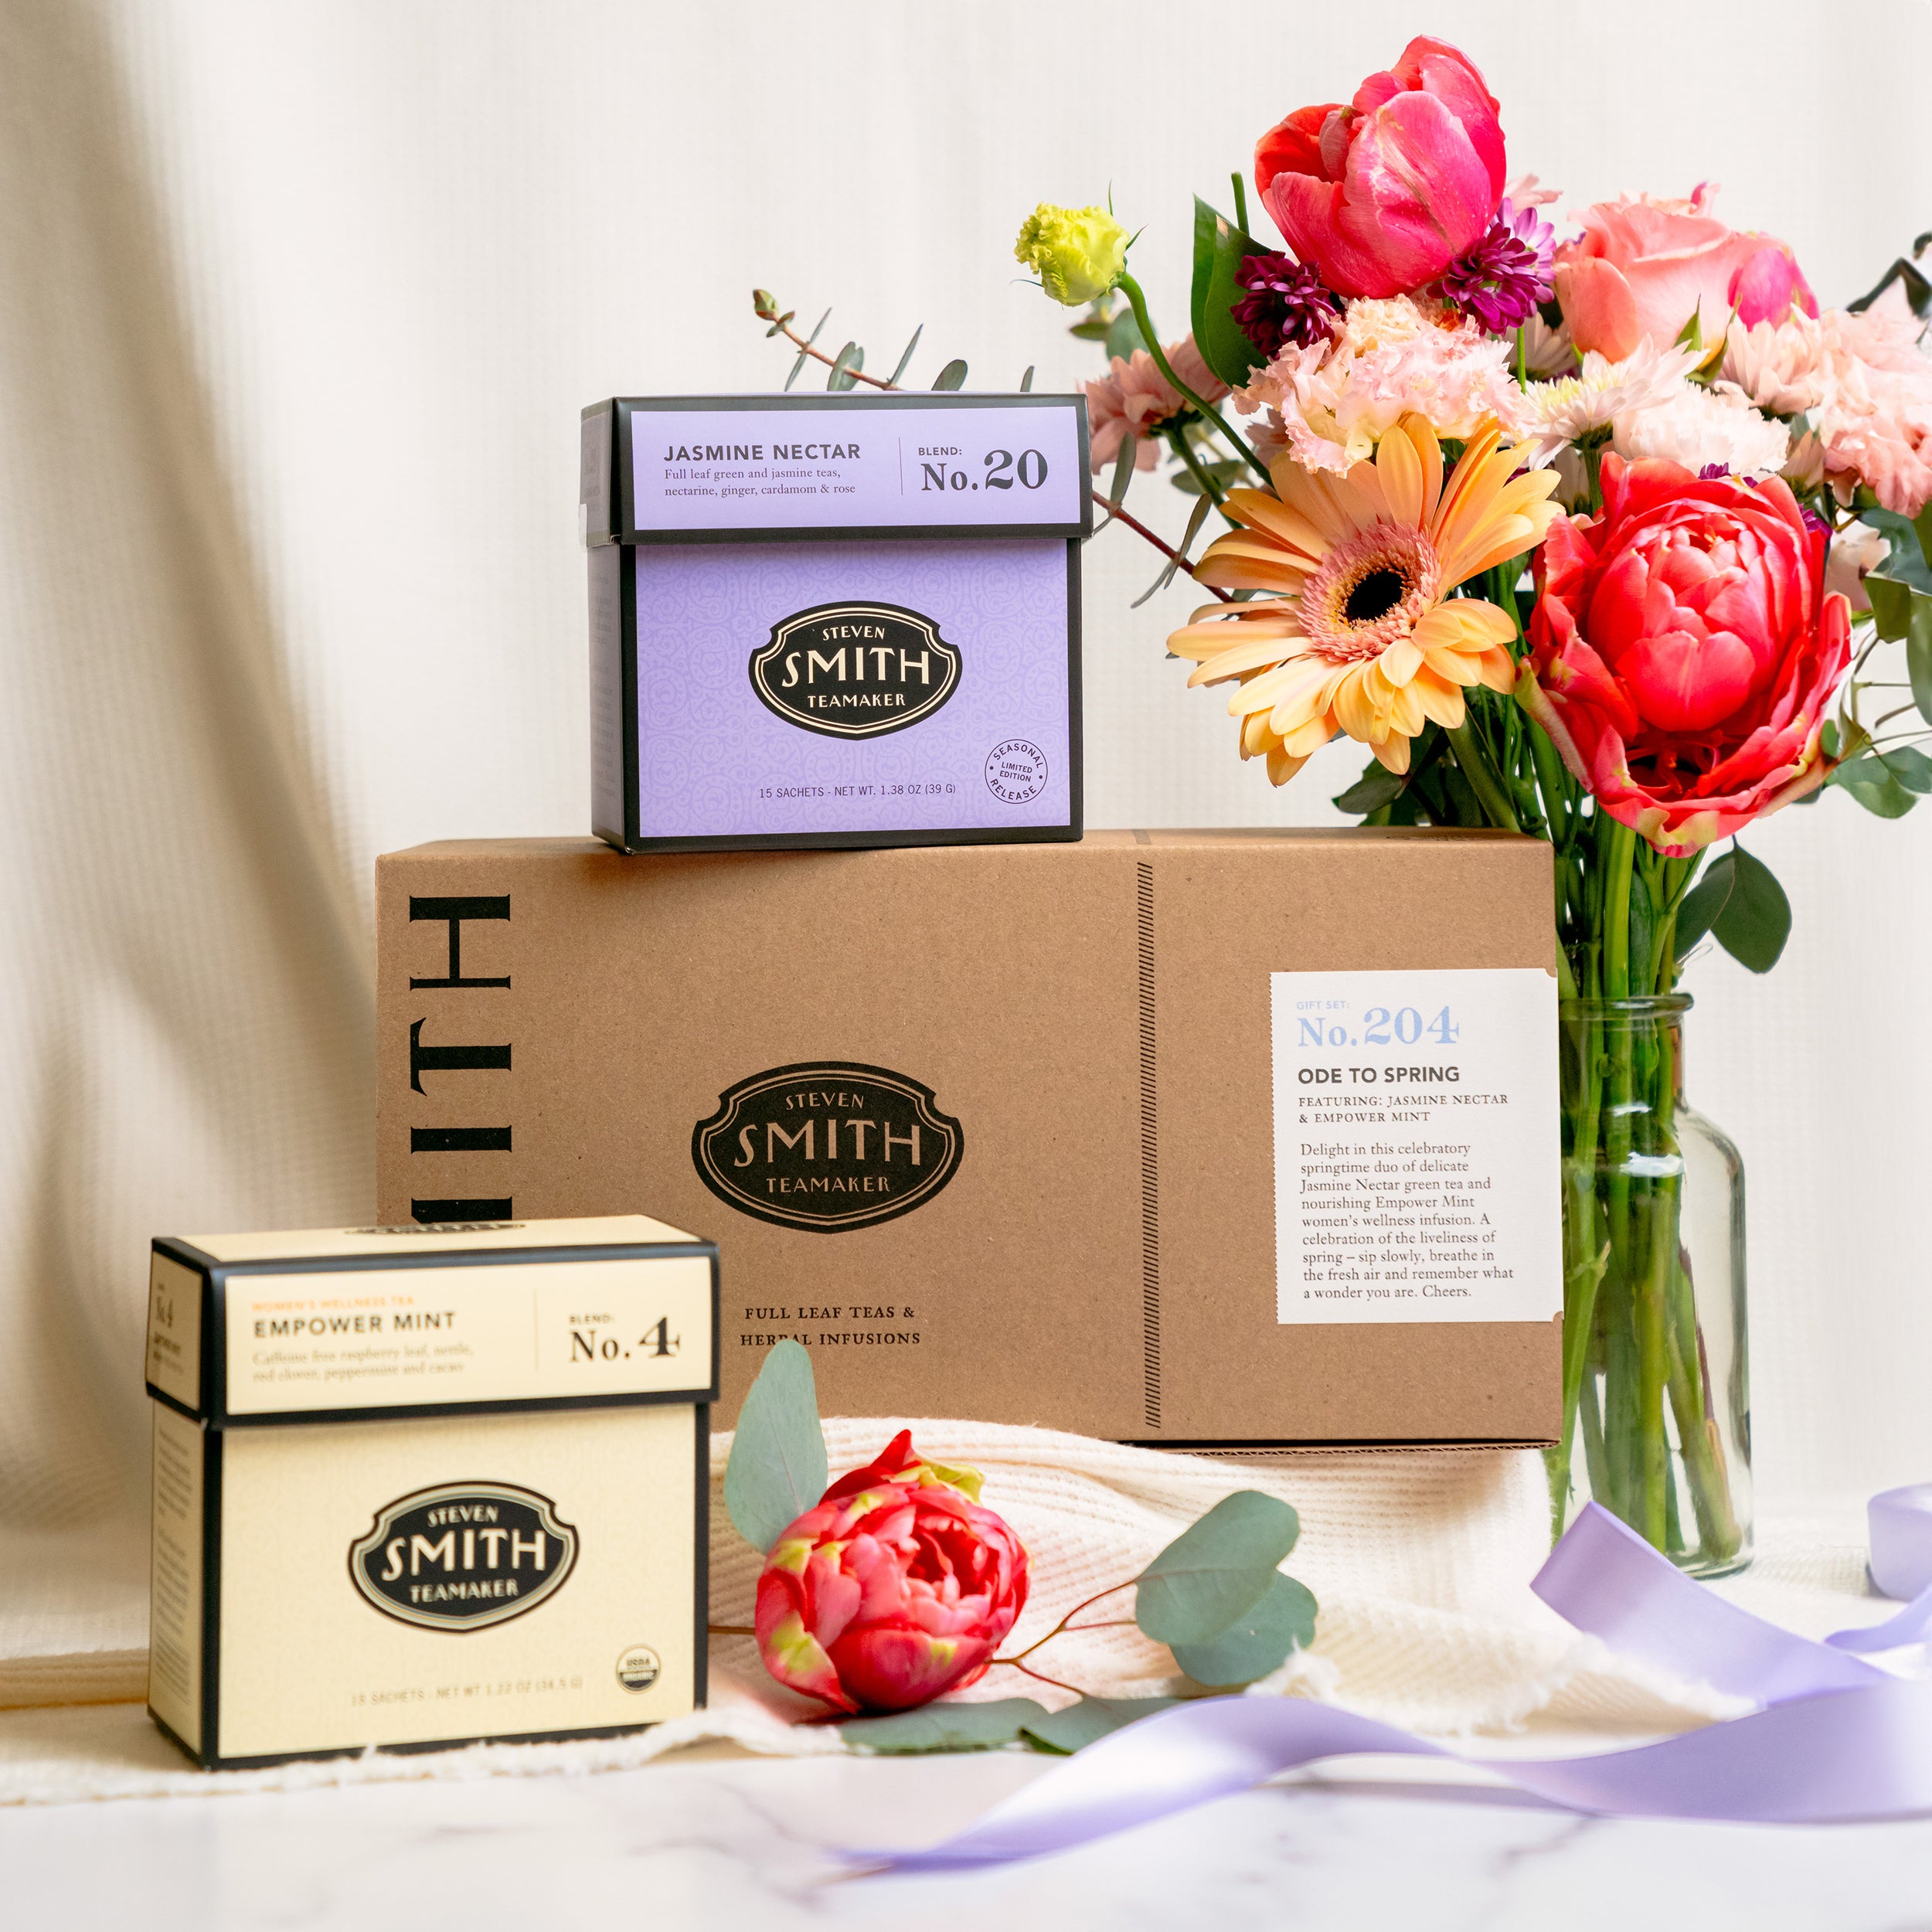 Gift box with Jasmine Nectar and Empower Mint with vase of pink flowers.